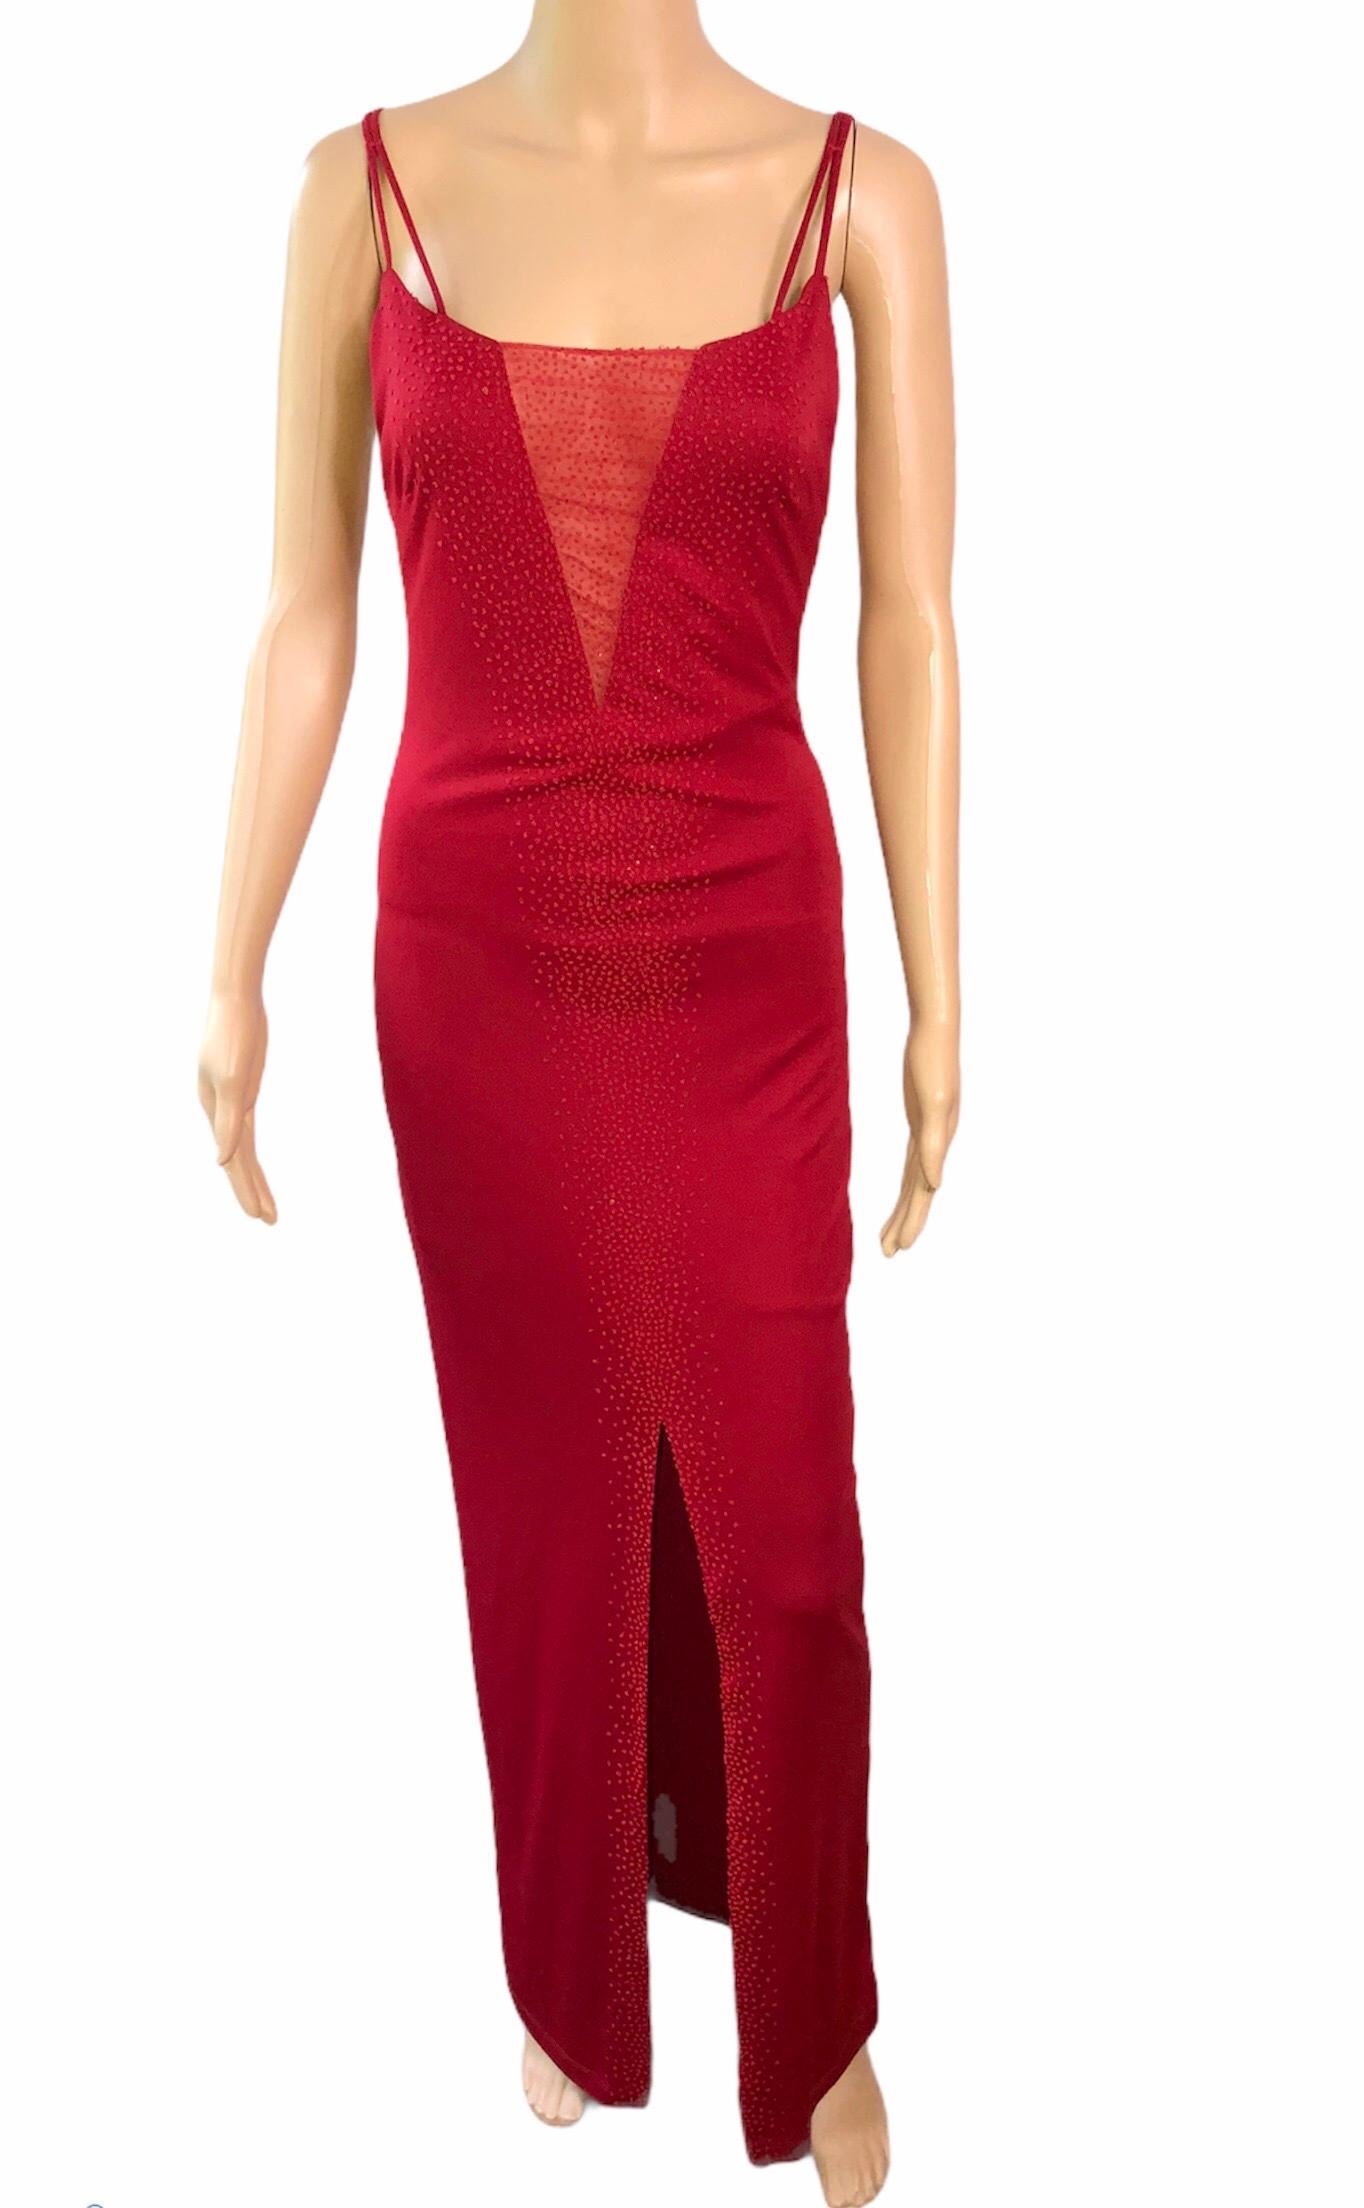 Women's or Men's Gianni Versace 1990's Vintage Embellished Sheer Panel Red Evening Dress Gown For Sale